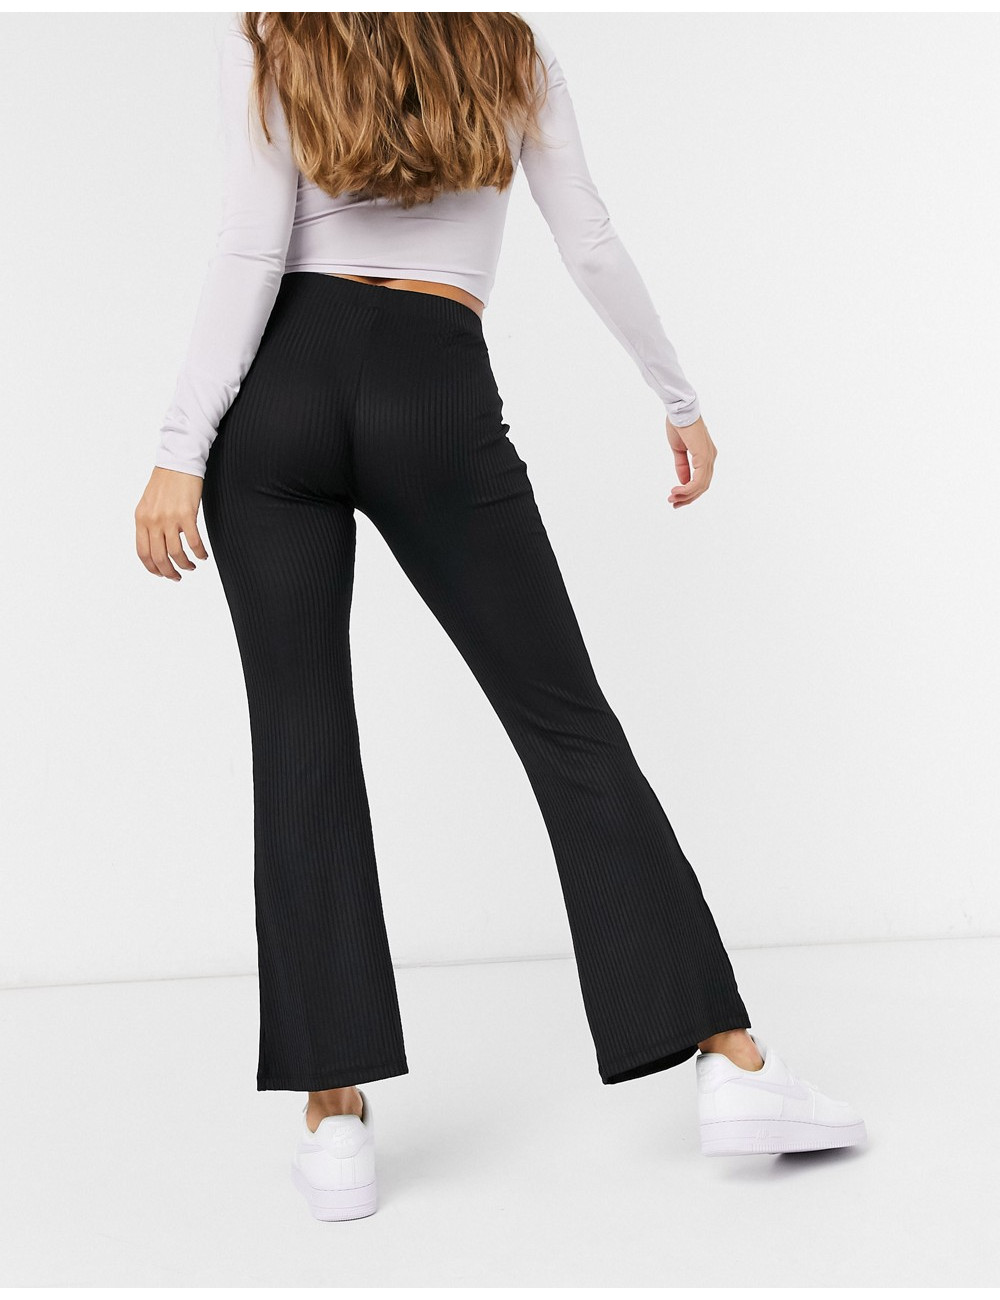 Pieces jersey flares in black